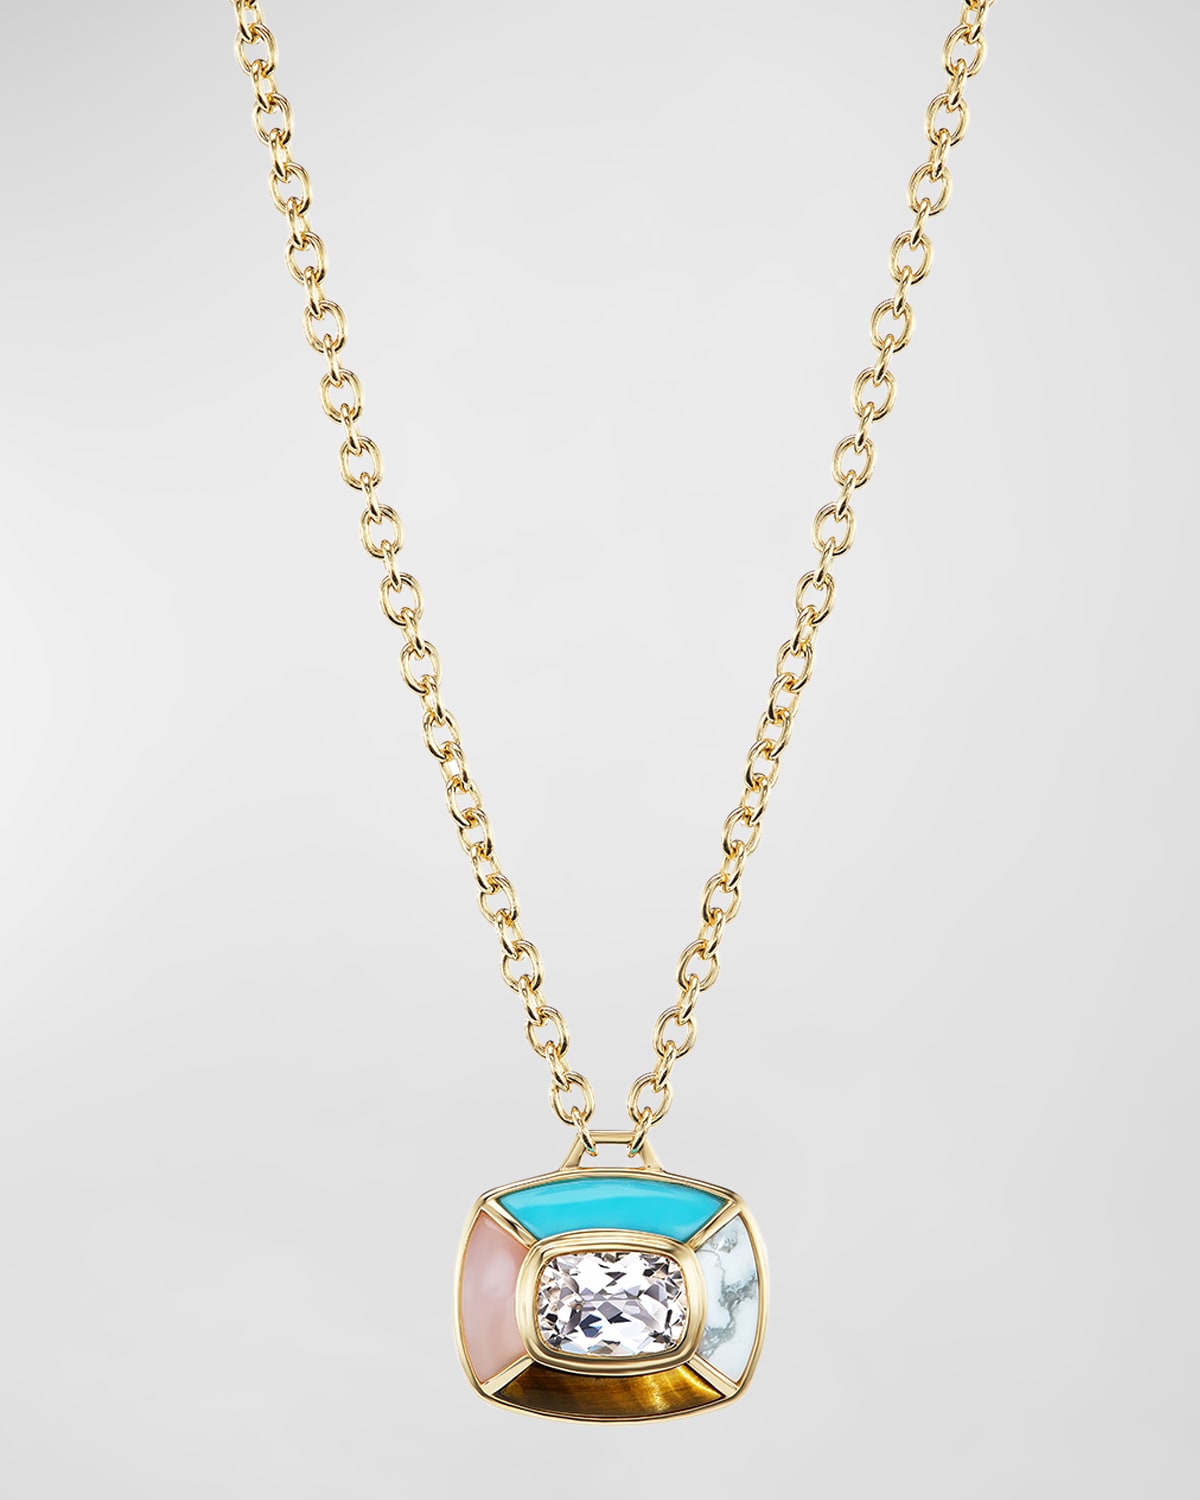 Mini Patchwork Necklace in 18K Yellow Gold and Topaz, 16"L